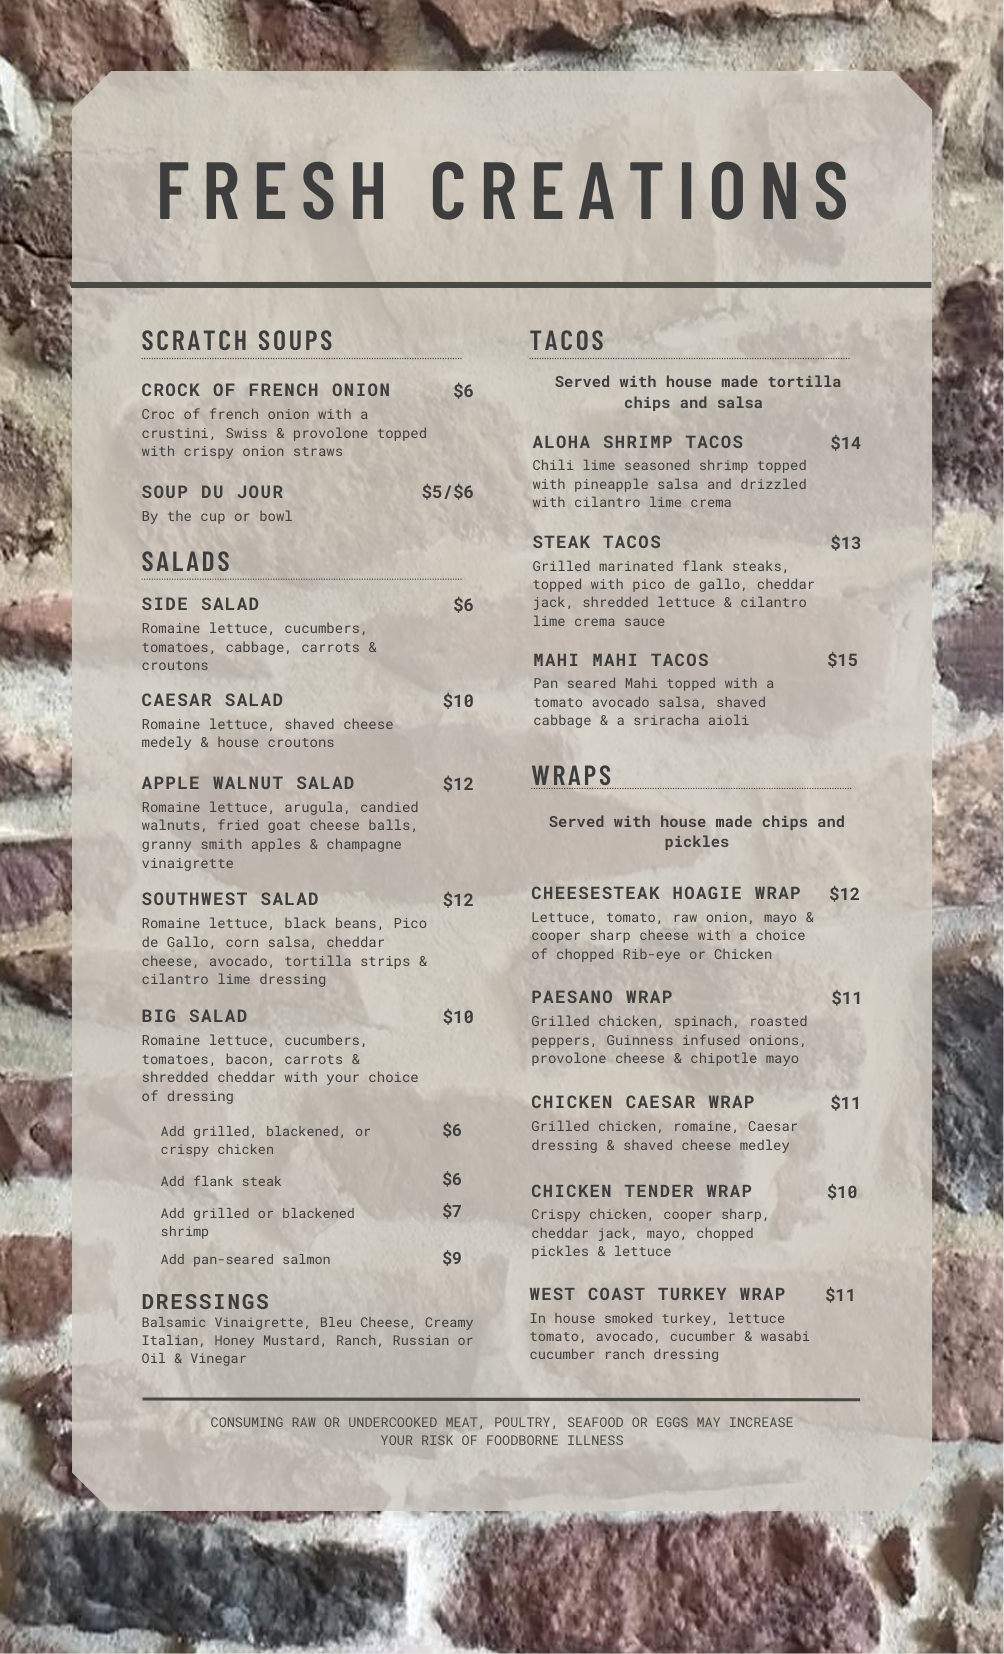 A menu titled "fresh creations" featuring various food items such as soups, salads, and wraps, with prices listed next to each item, displayed against a brick wall background.